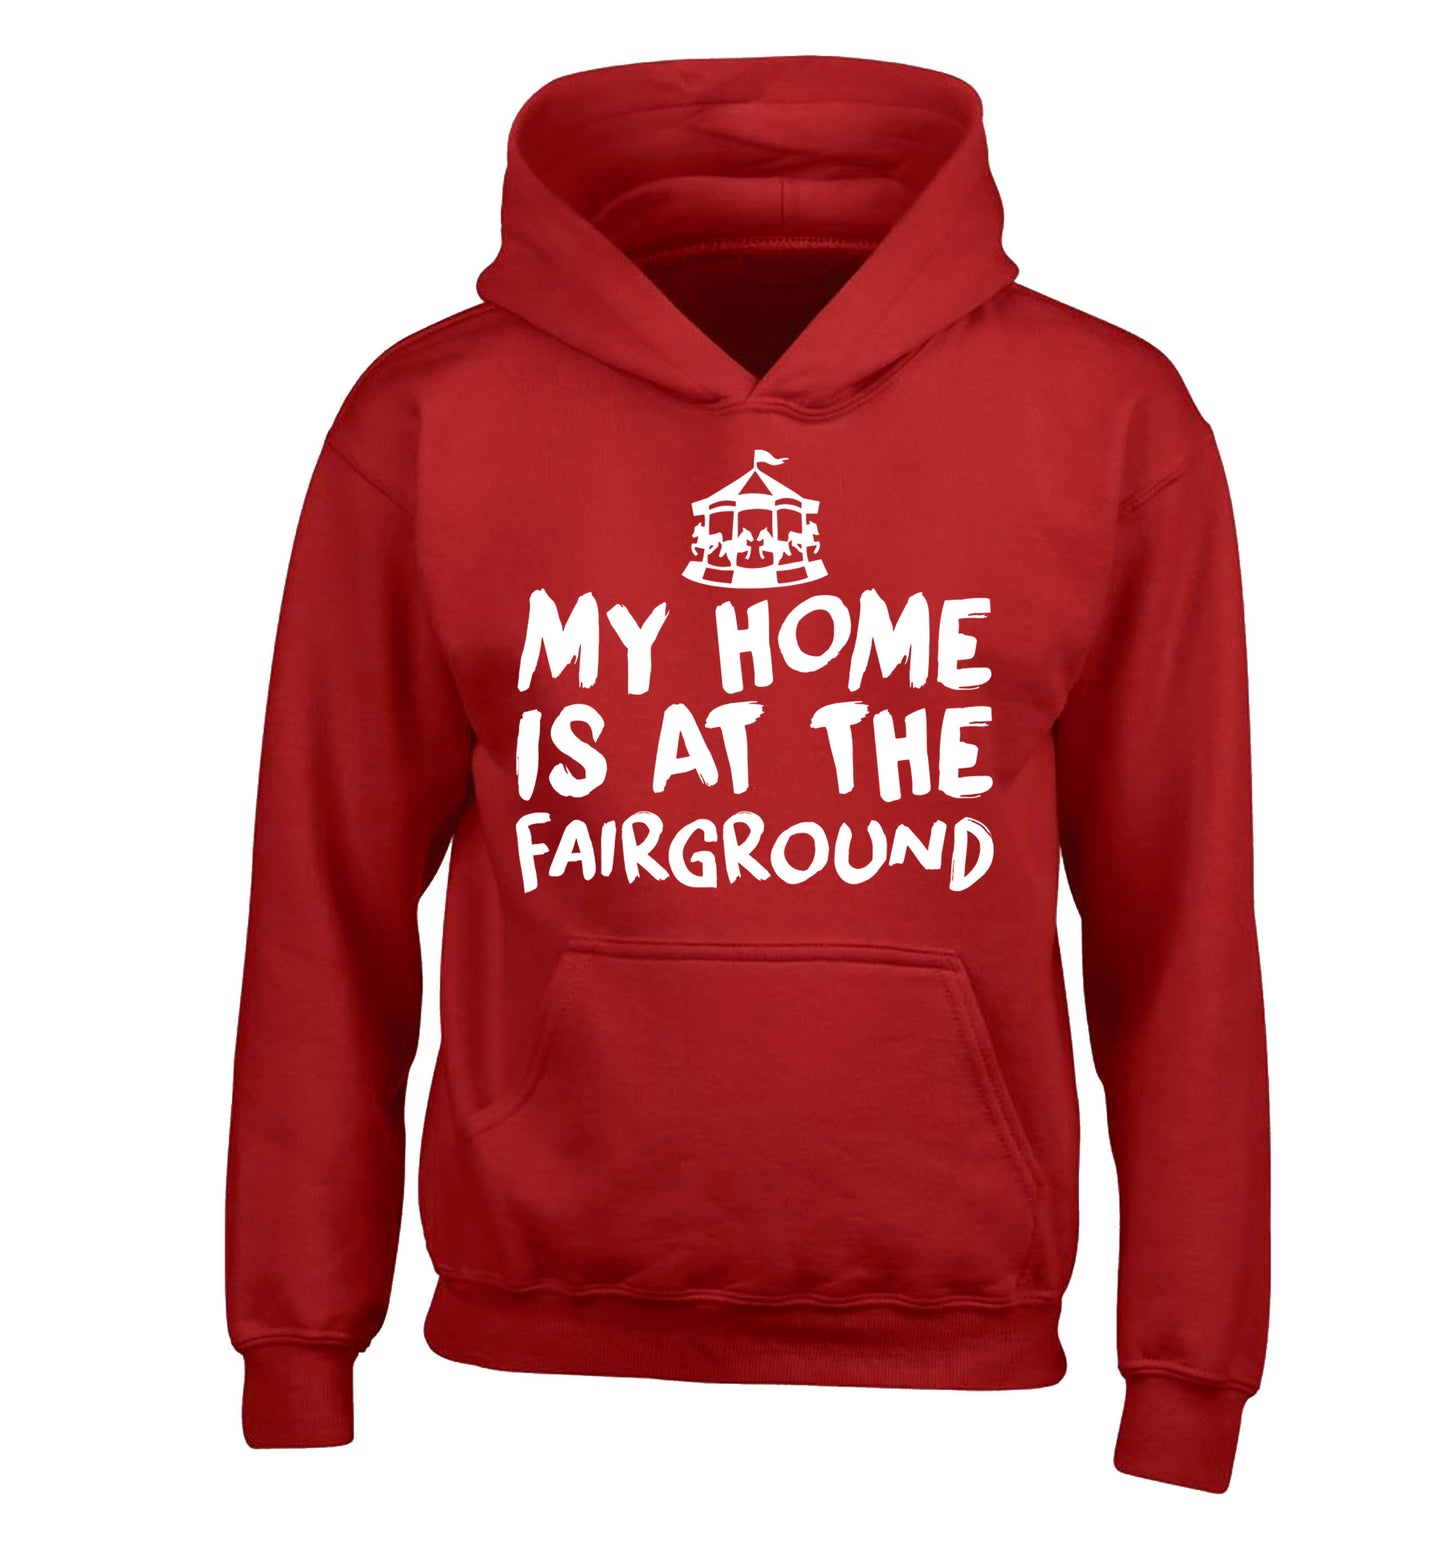 My home is at the fairground children's red hoodie 12-14 Years